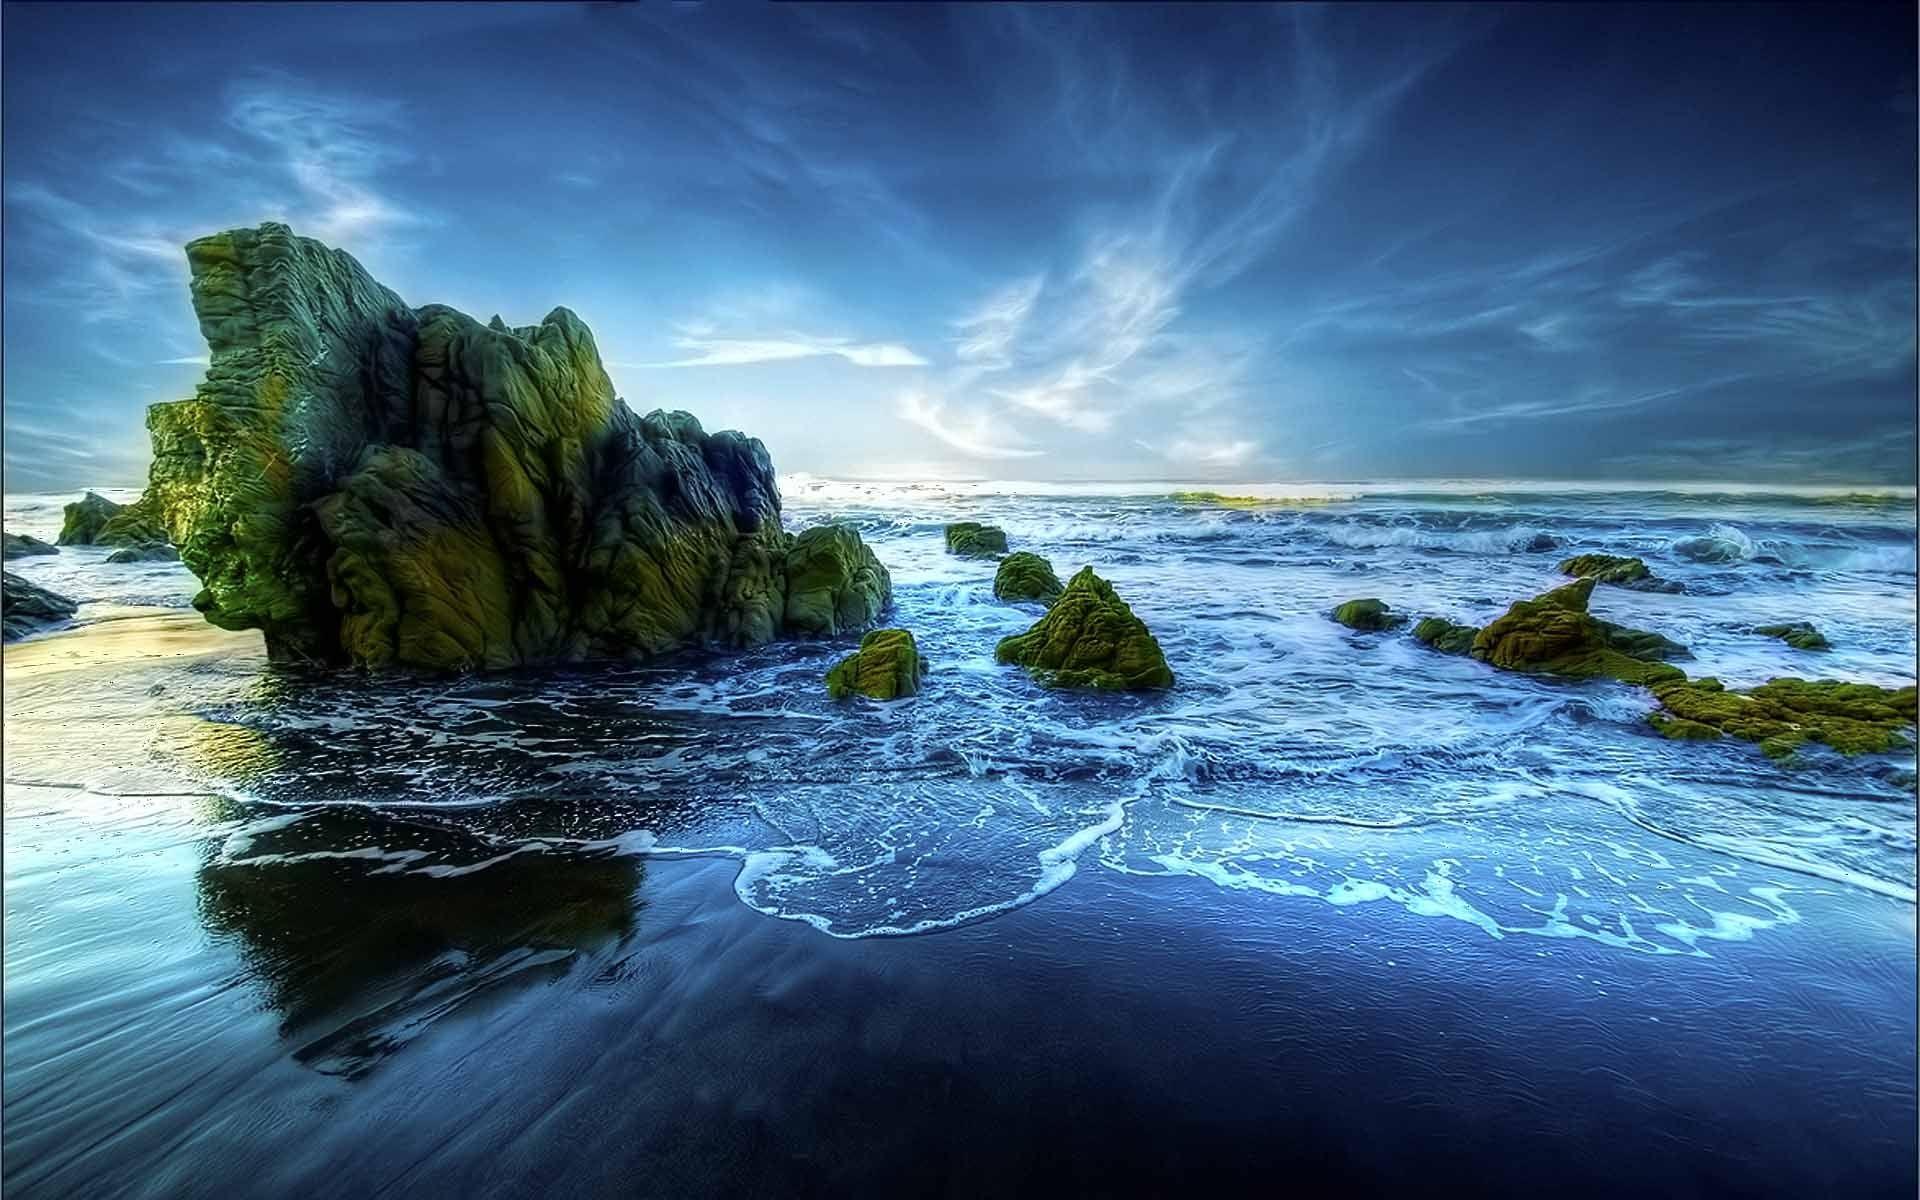 Best 40 Peaceful Wallpapers on HipWallpaper Peaceful Wallpapers